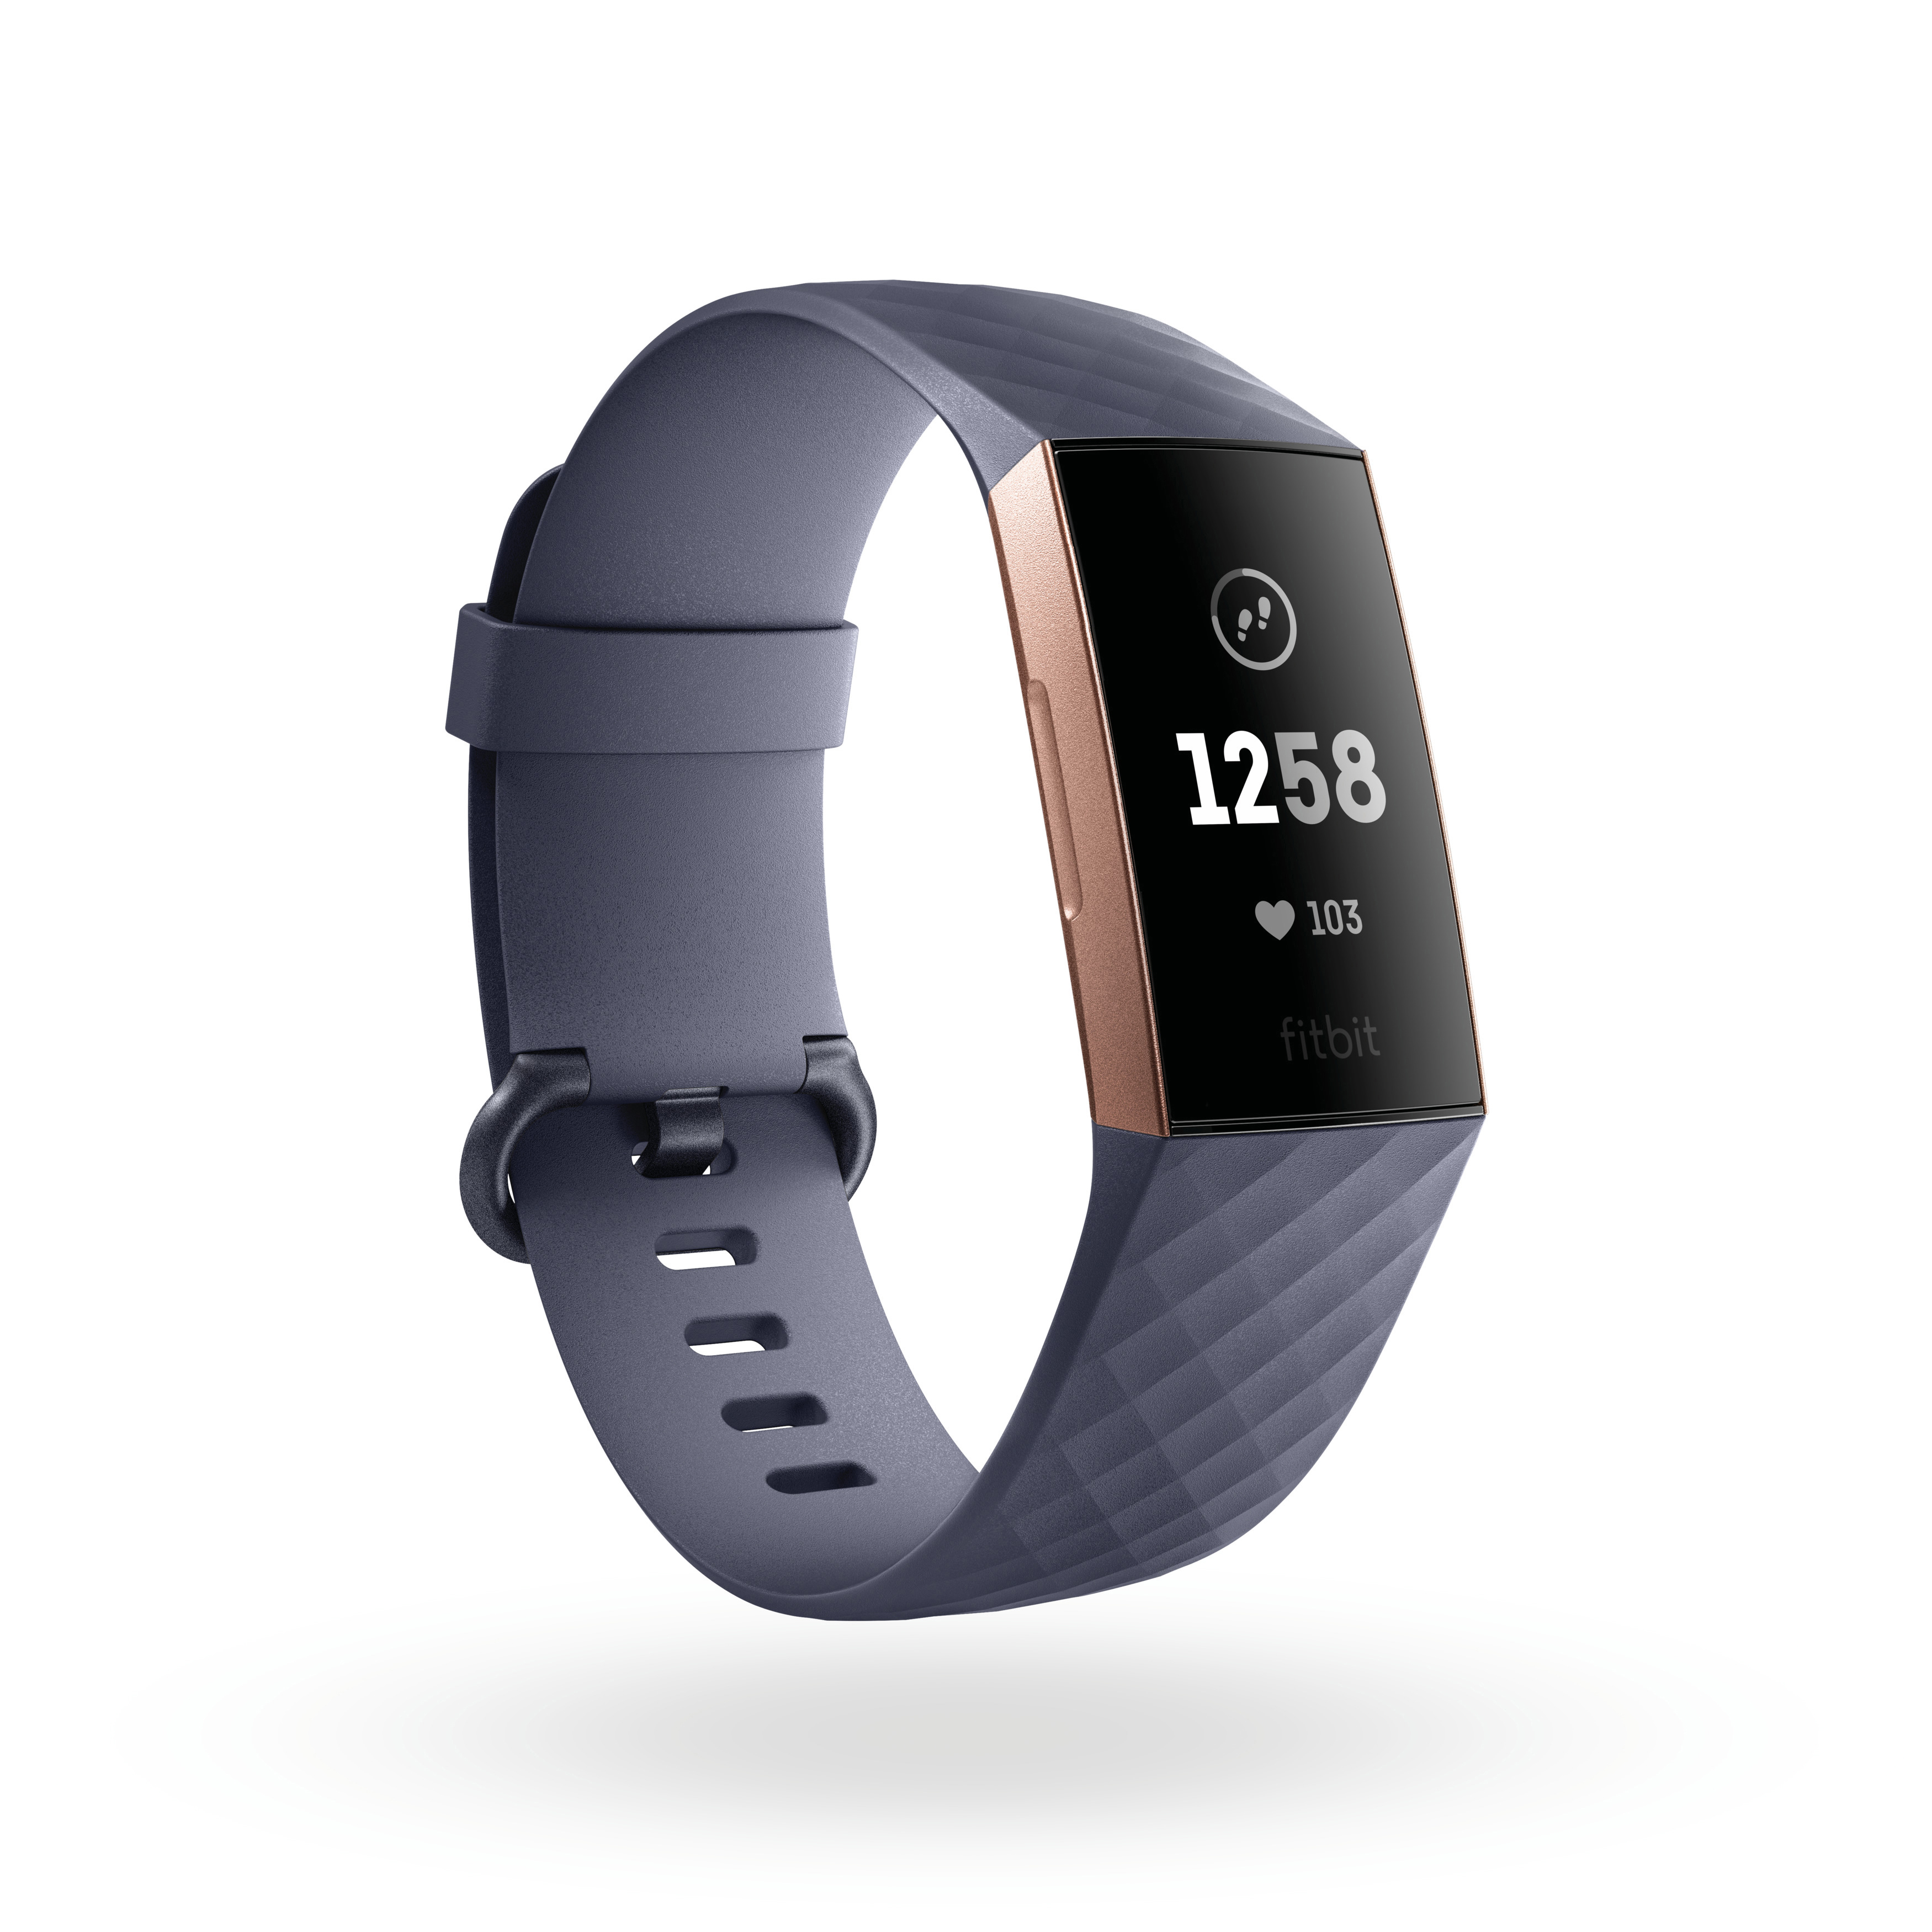 220 FITBIT 3, Gold - 140 180 Rose Band: Blau Grau L: Charge Gehäuse: 180mm mm, / mm - S: Fitness mm, Tracker,